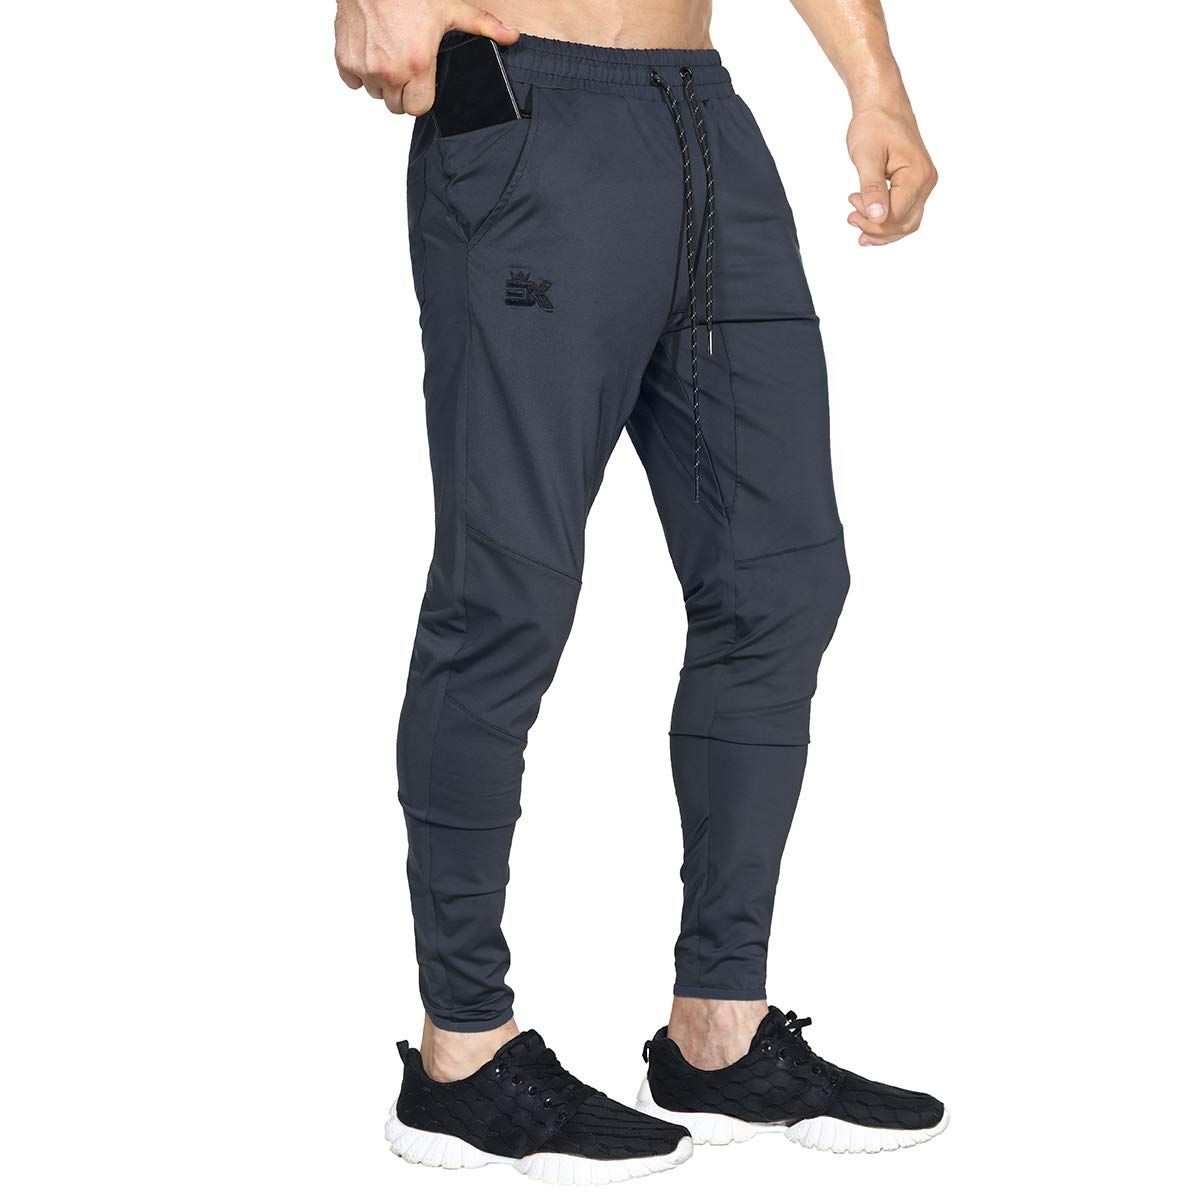 Best Guide To The 10 Different Types of Pants for Men | LBB